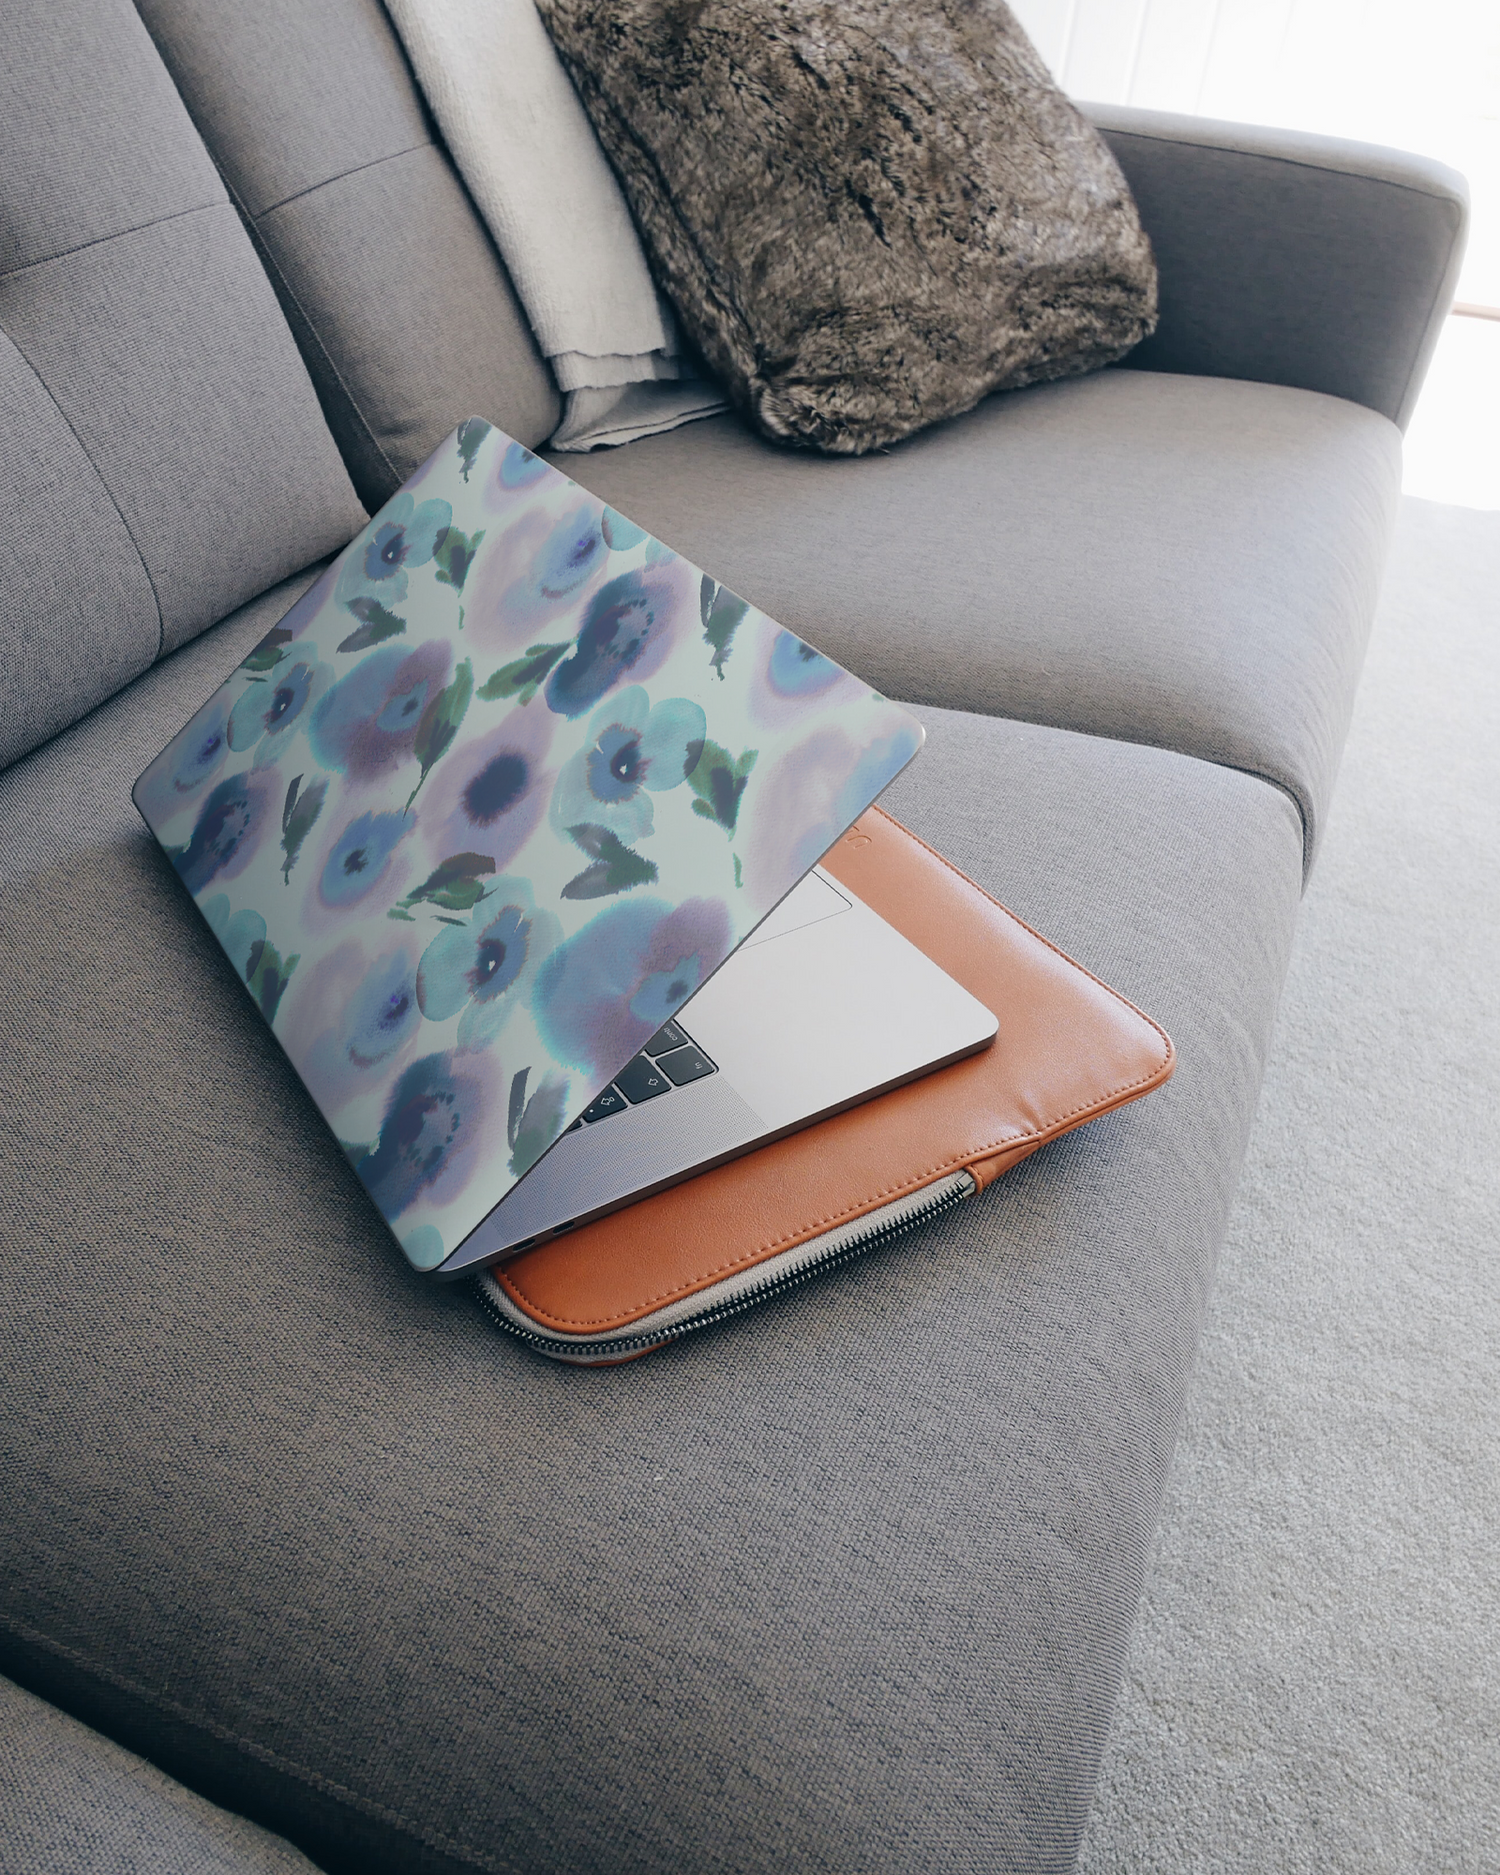 Watercolour Flowers Blue Laptop Skin for 15 inch Apple MacBooks on a couch